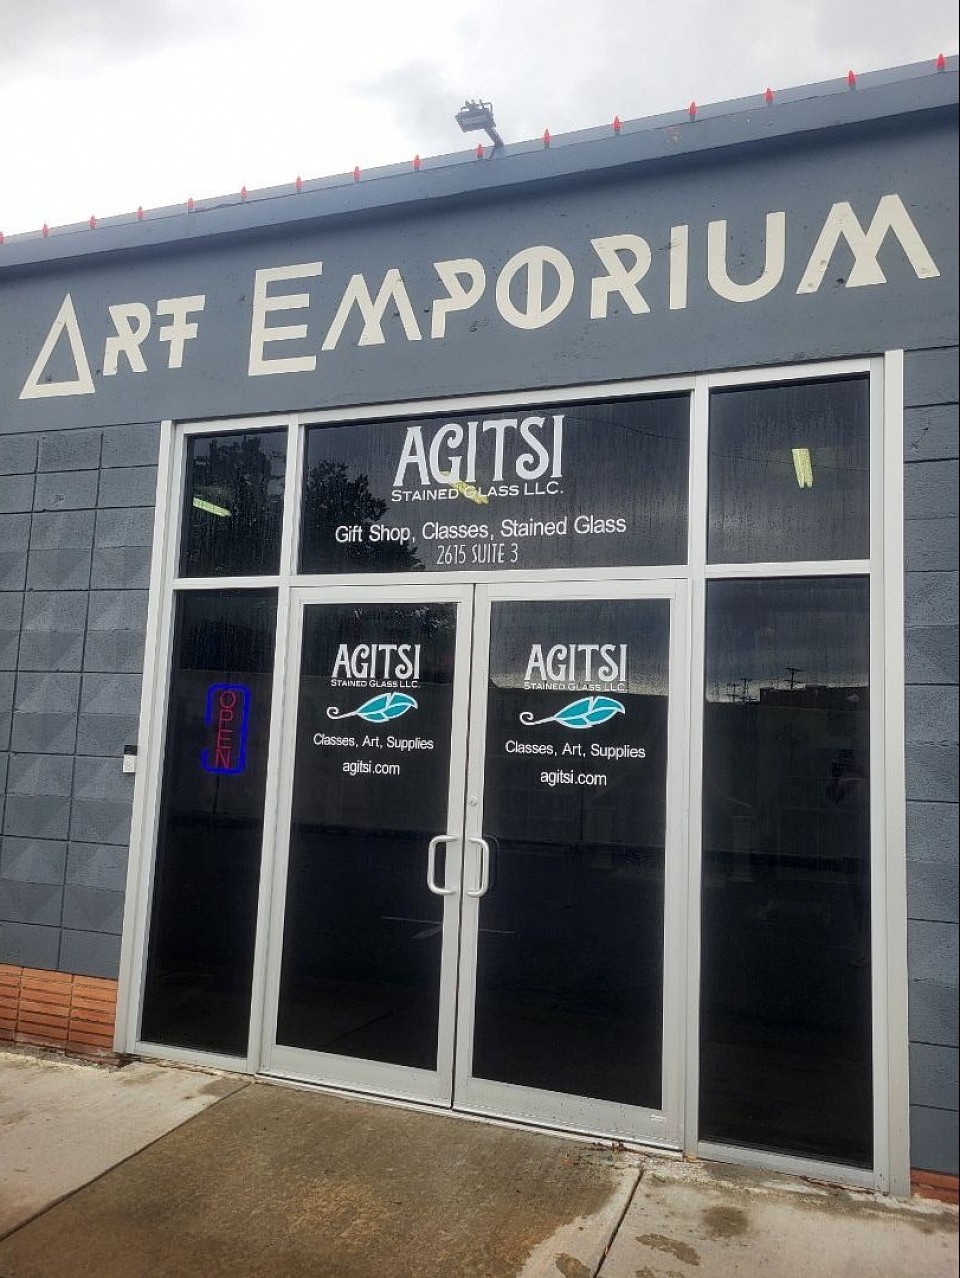 Agitsi Stained Glass Studio has moved to The Art Emporium,  Route66 Main in Tulsa, Oklahoma